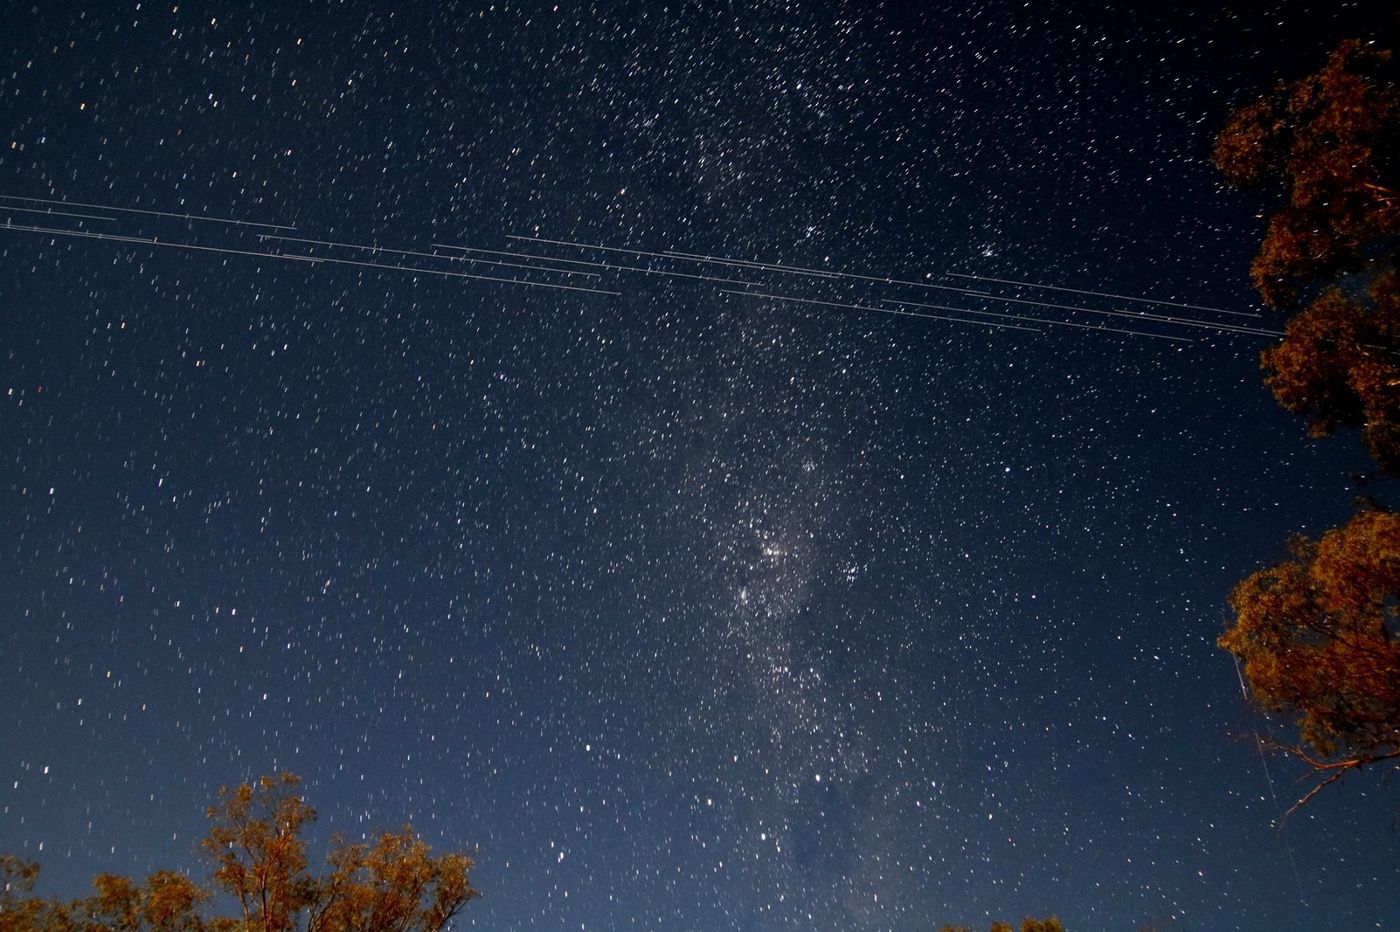 This an image of the sky taken from Arkaroola, South Australia. You can see SpaceX Starlink satellites streaking through the image. Credit: Padraic Koen.